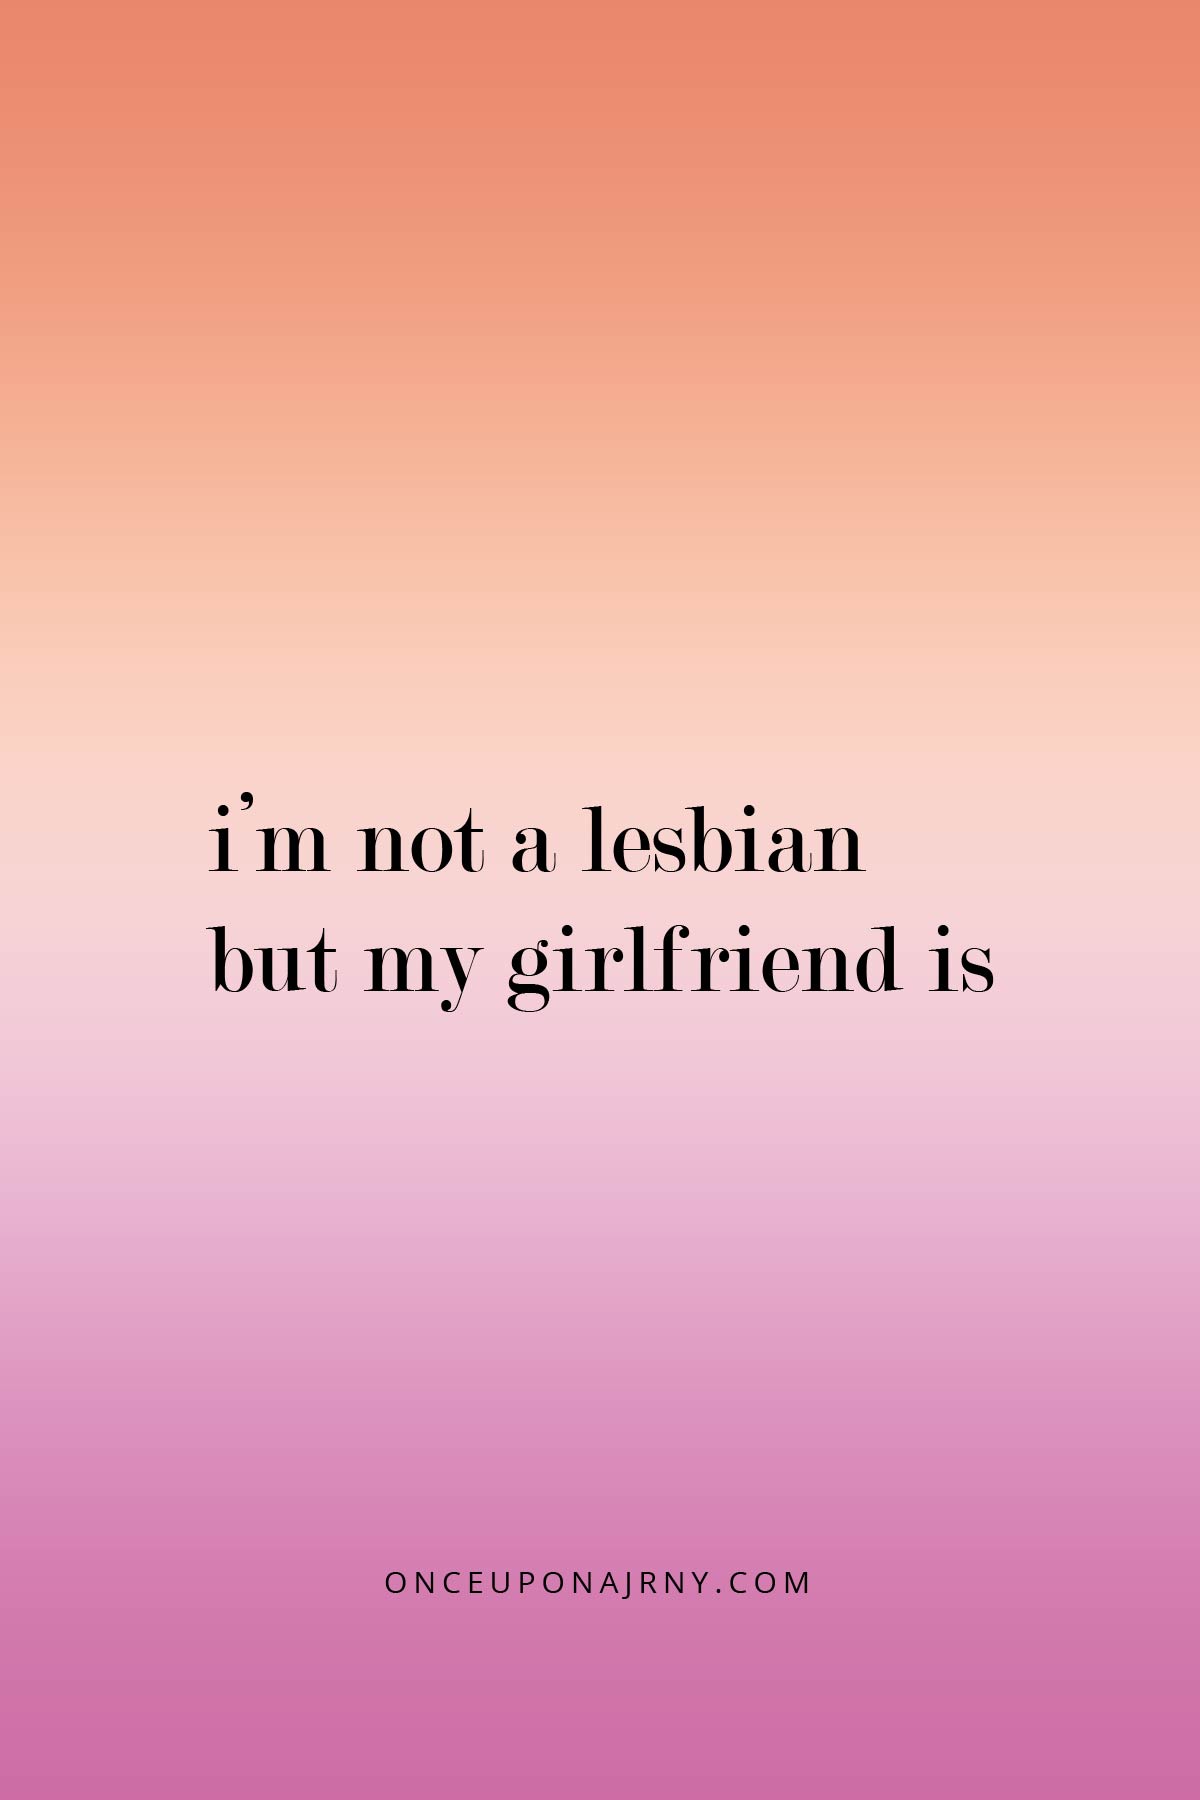 I’m not a lesbian, but my girlfriend is lesbian quotes for your girlfriend